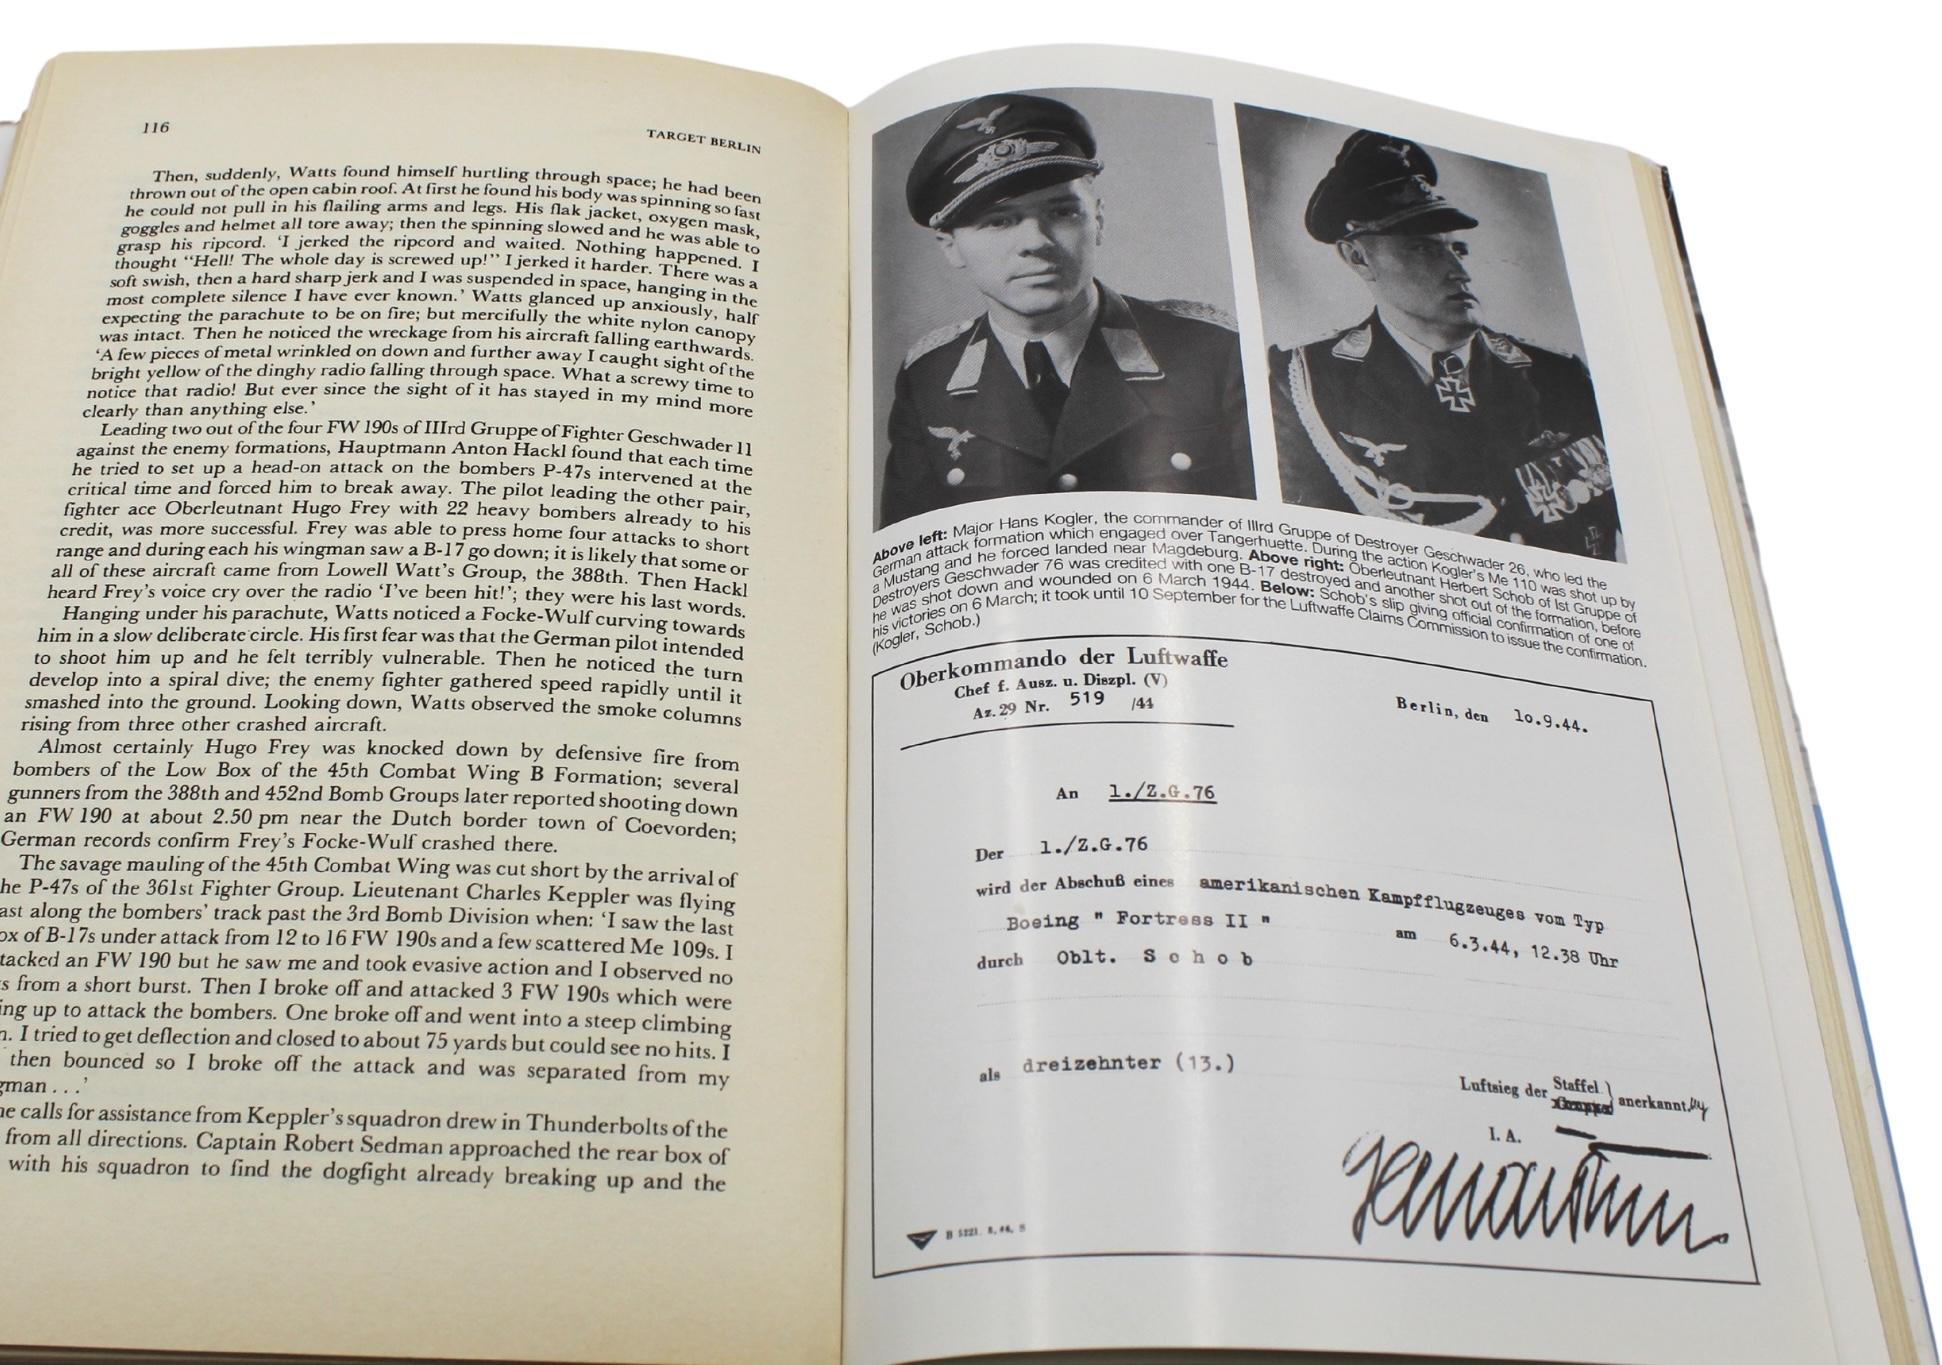 Target Berlin by Jeffrey L. Ethell and Alfred Price, Signed by Author & 8 Pilots For Sale 3